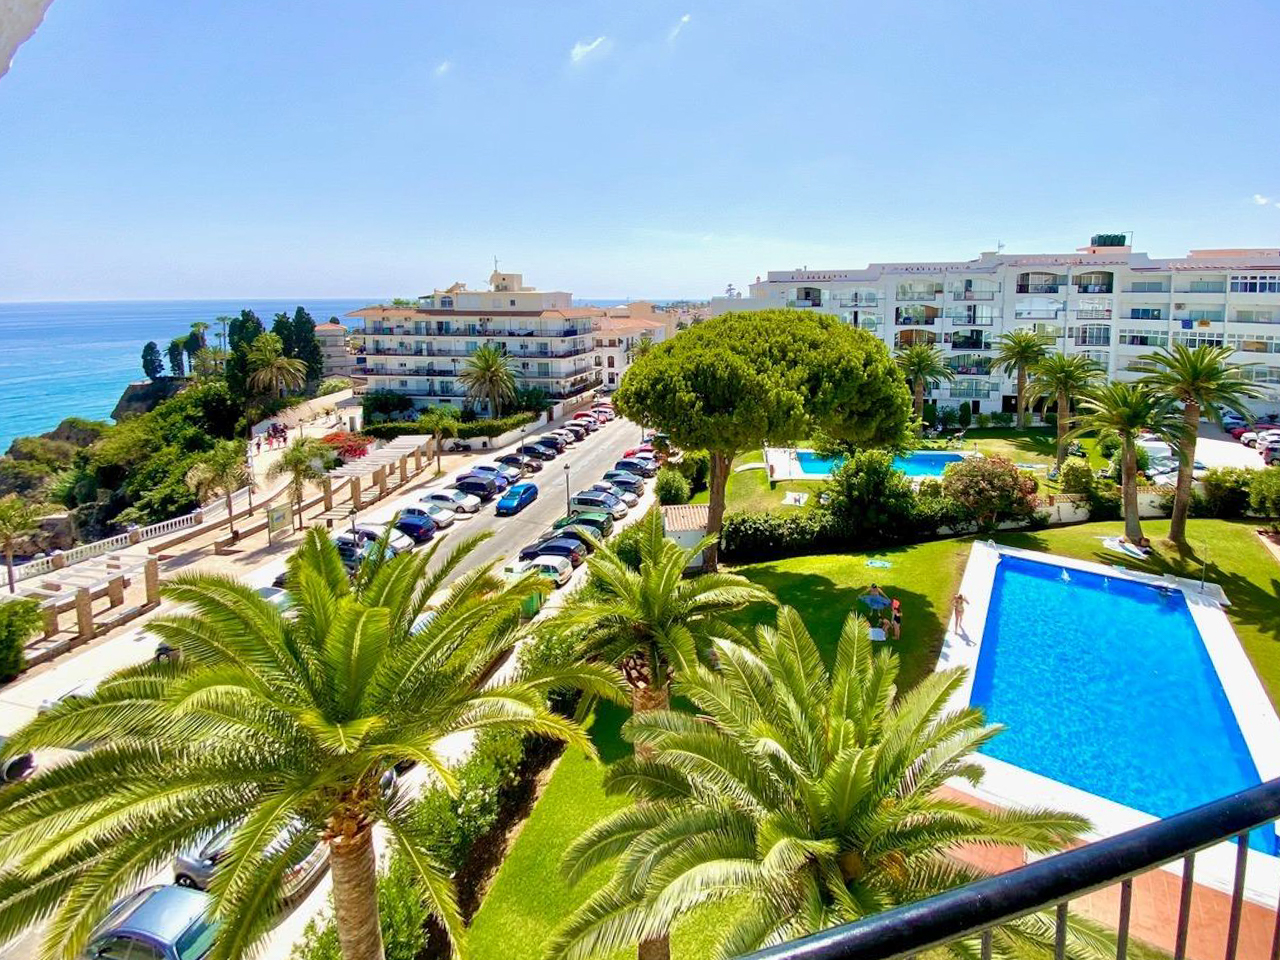 Top floor apartment for sale situated in Verde Mar